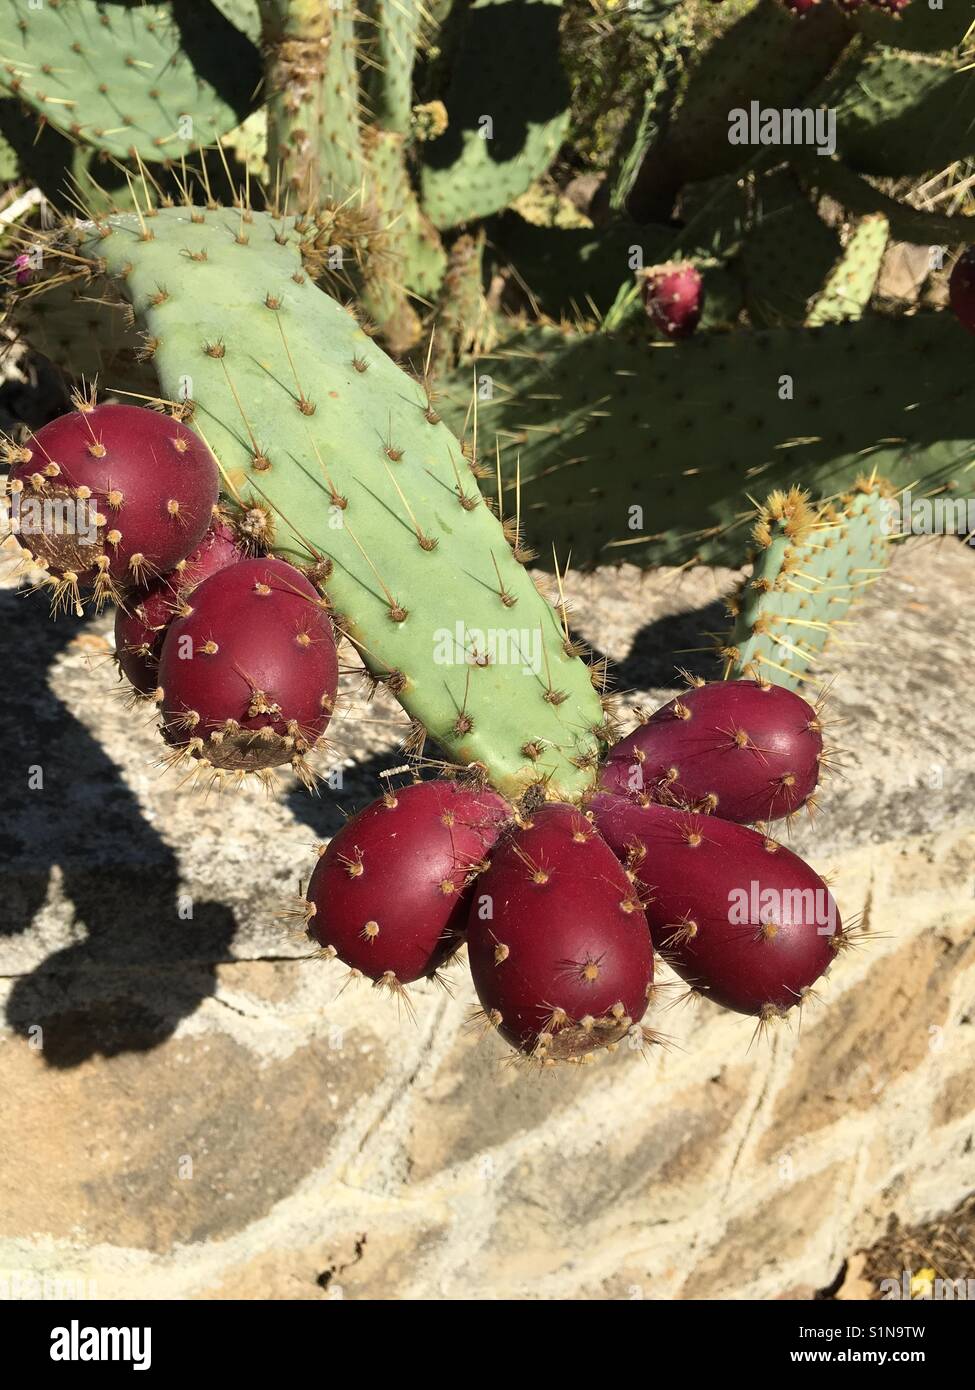 Prickly pears on Cactus Stock Photo